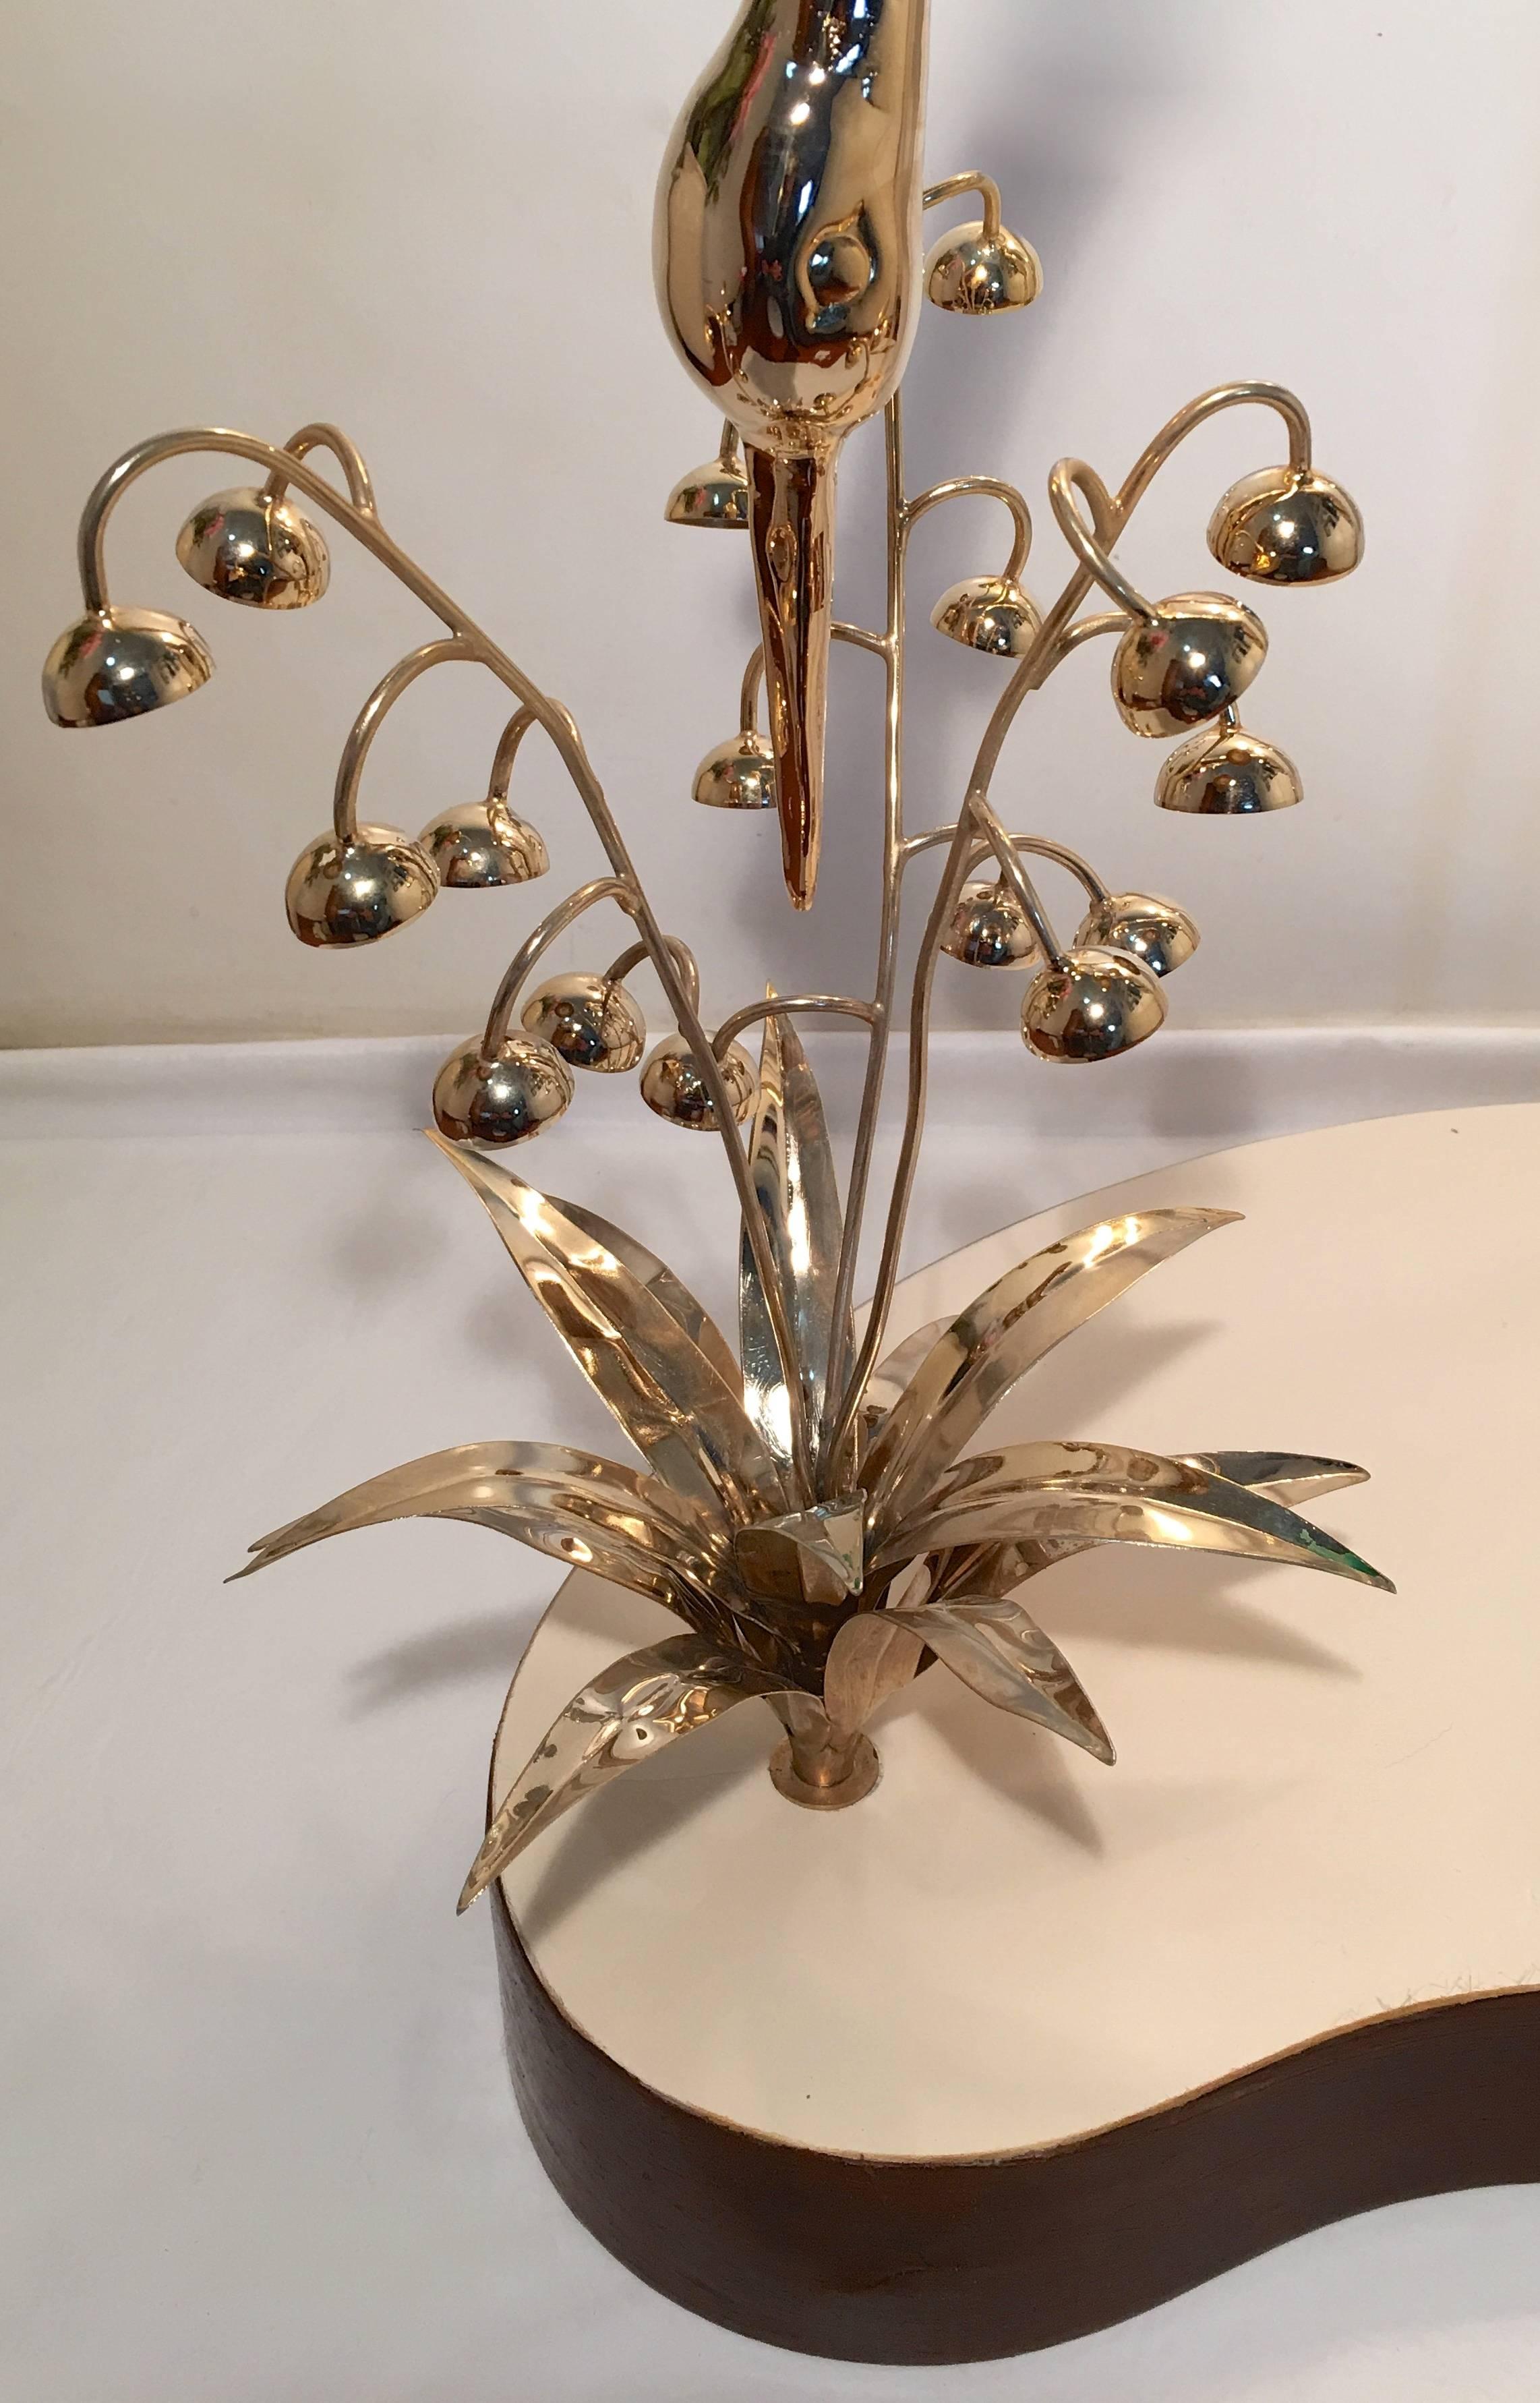 Italian Floor Lamp with a Brass Sculpture of a Heron and Flowers